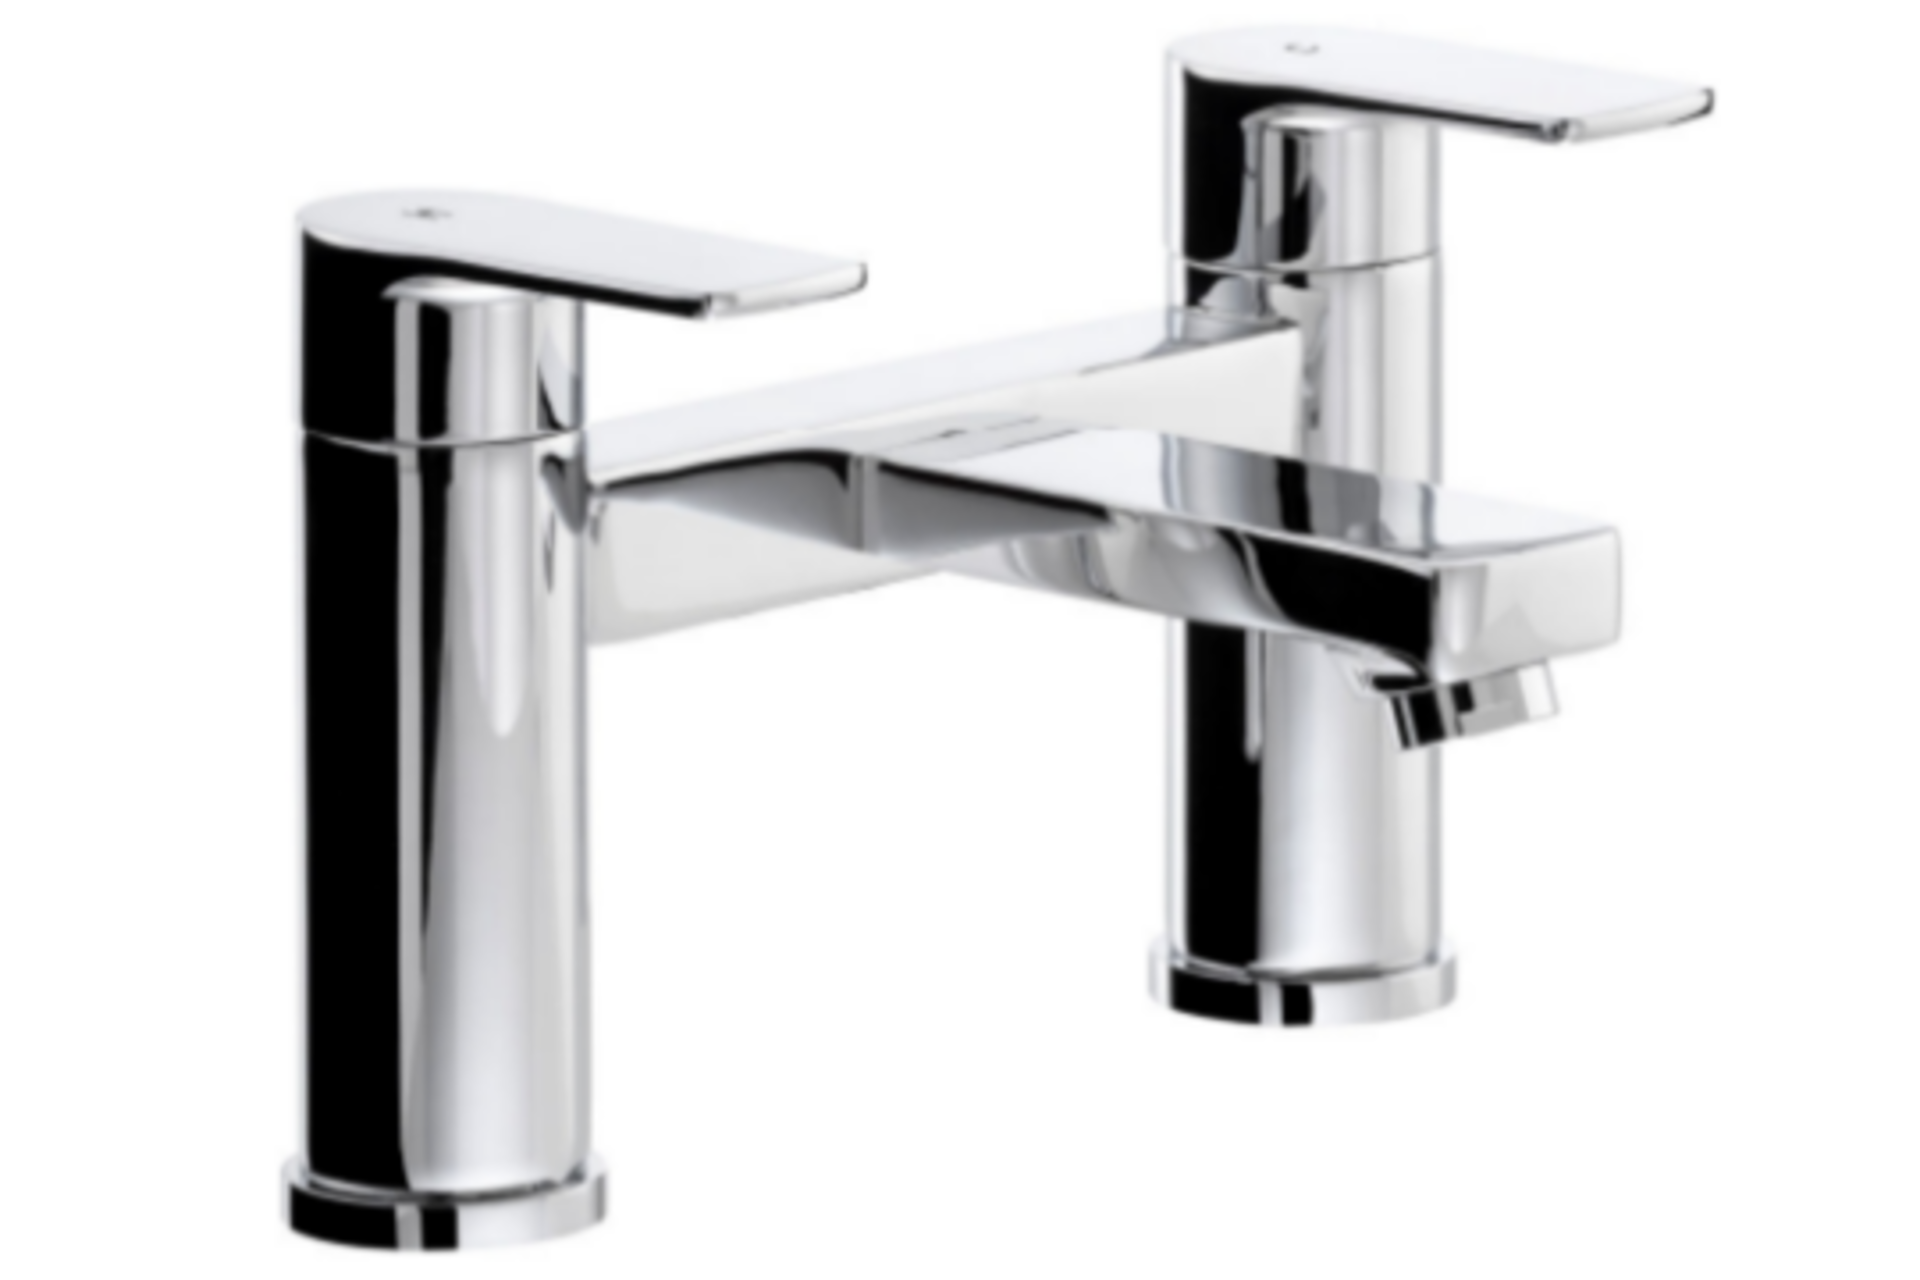 TRADE LOT 10 x NEW BOXED Abode Lamona CONTEMPORARY CHROME BATH TAPS. RRP £129.99 EACH, GIVING THIS